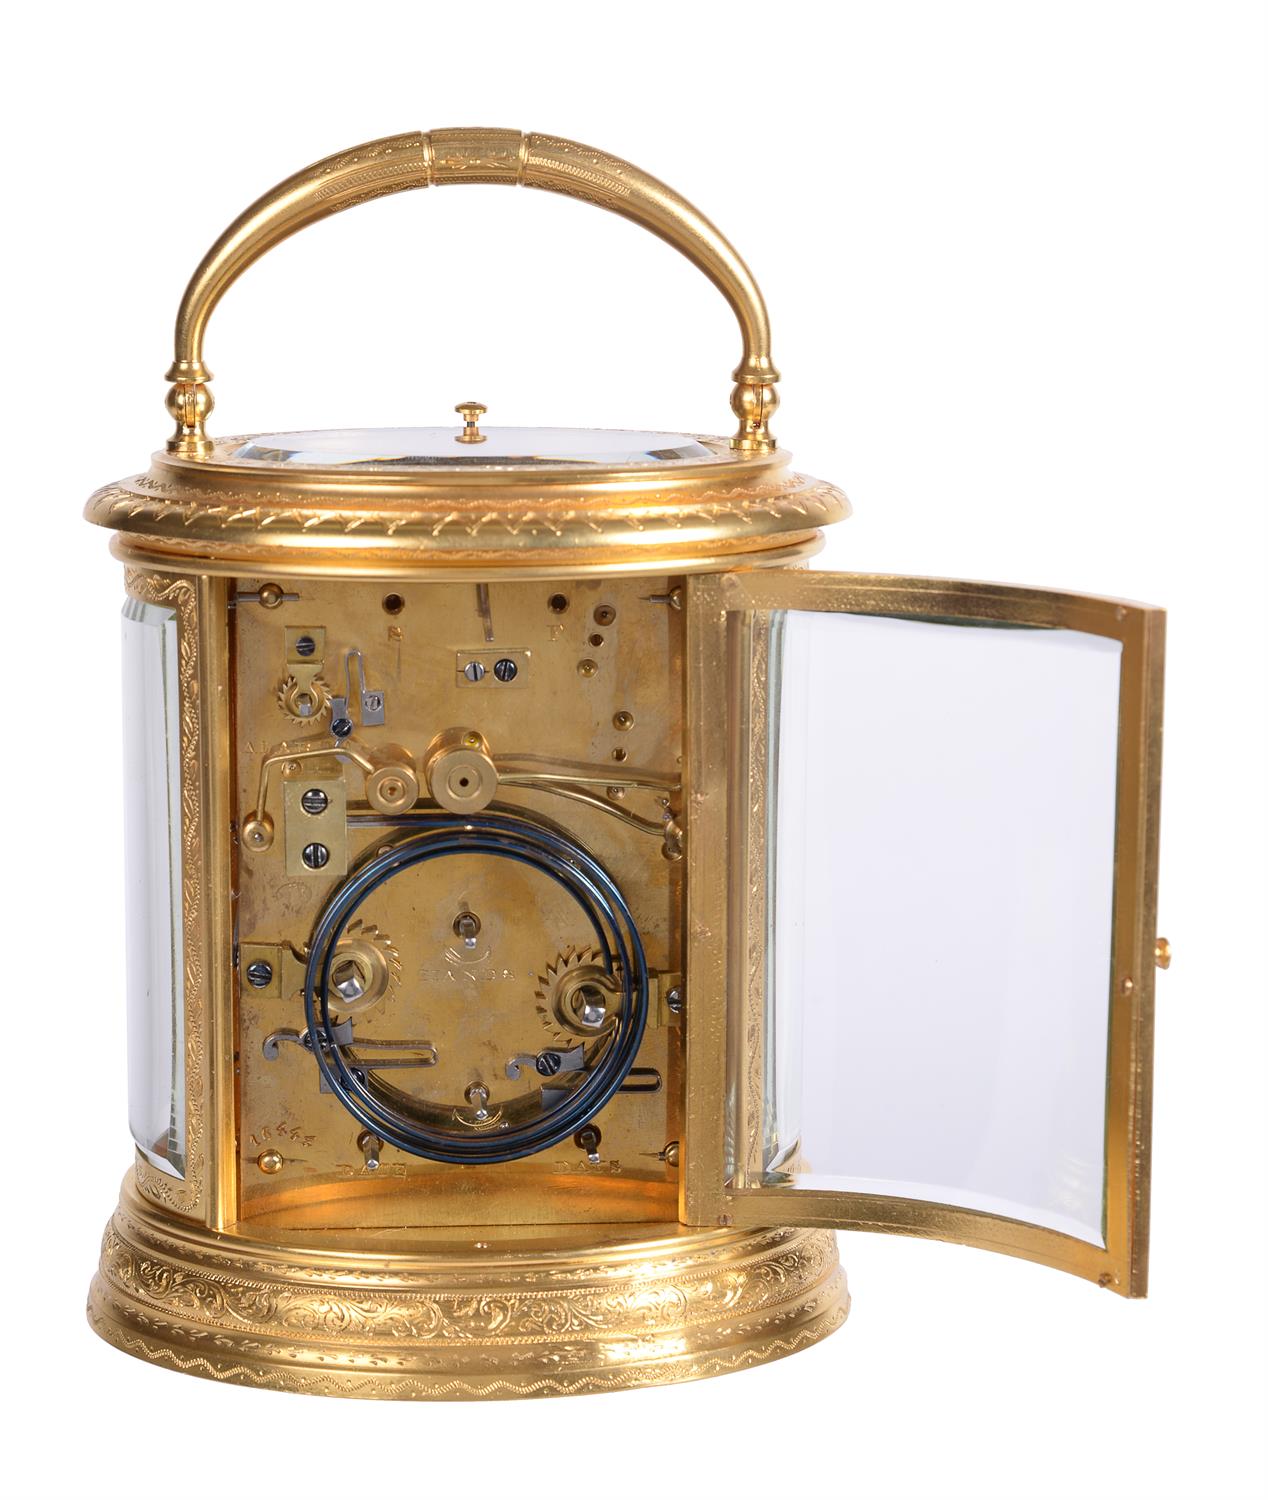 An oval grande-sonnerie calendar alarm carriage clock, Drocourt for Tiffany and Co., circa 1870 - Image 3 of 3